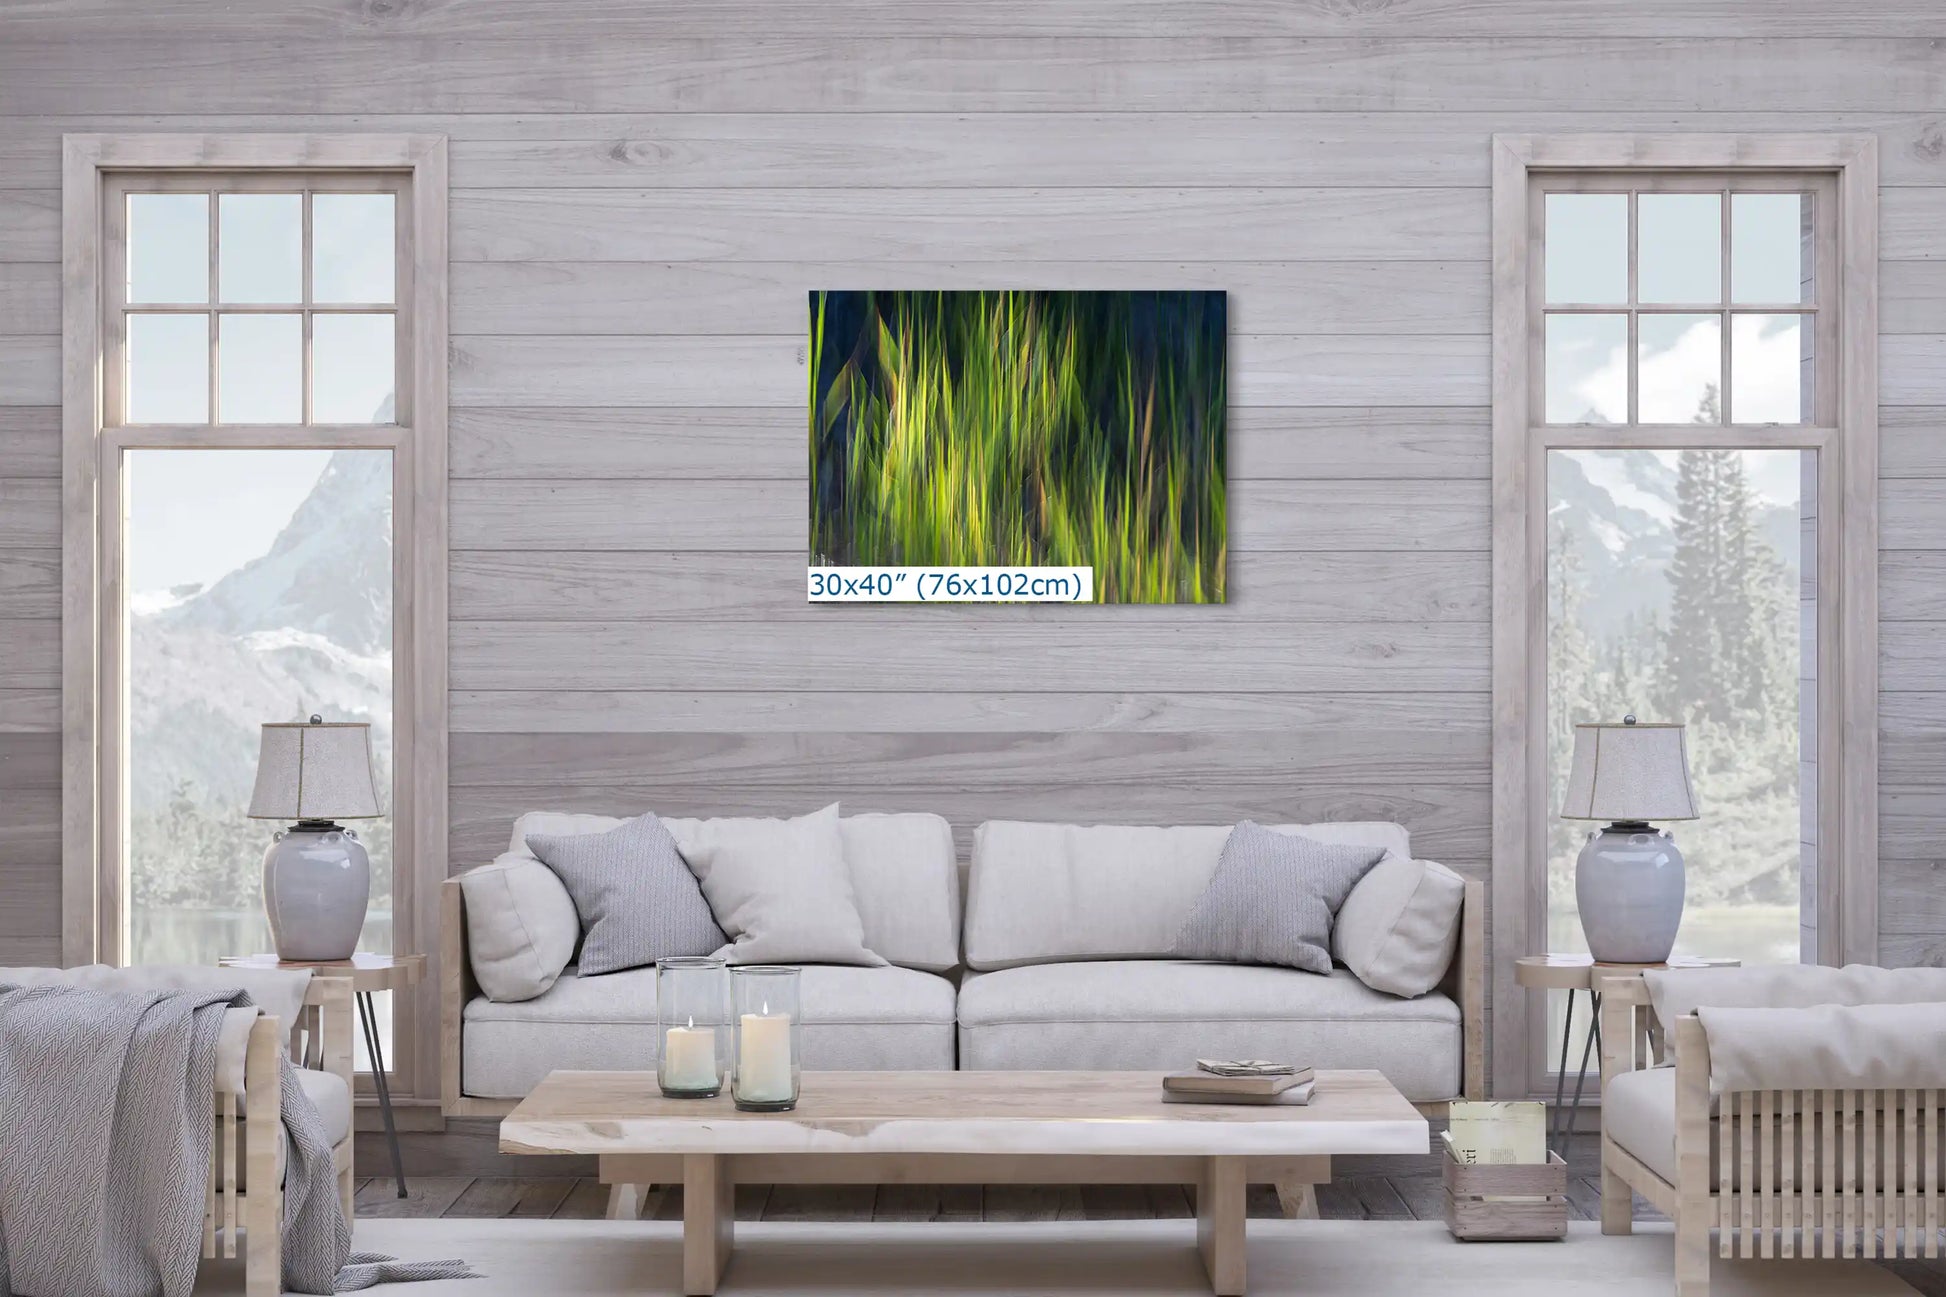 A large 30"x40" canvas displaying abstract green and yellow strokes, hanging above a sofa, serves as a bold centerpiece in the spacious, naturally-lit living room.